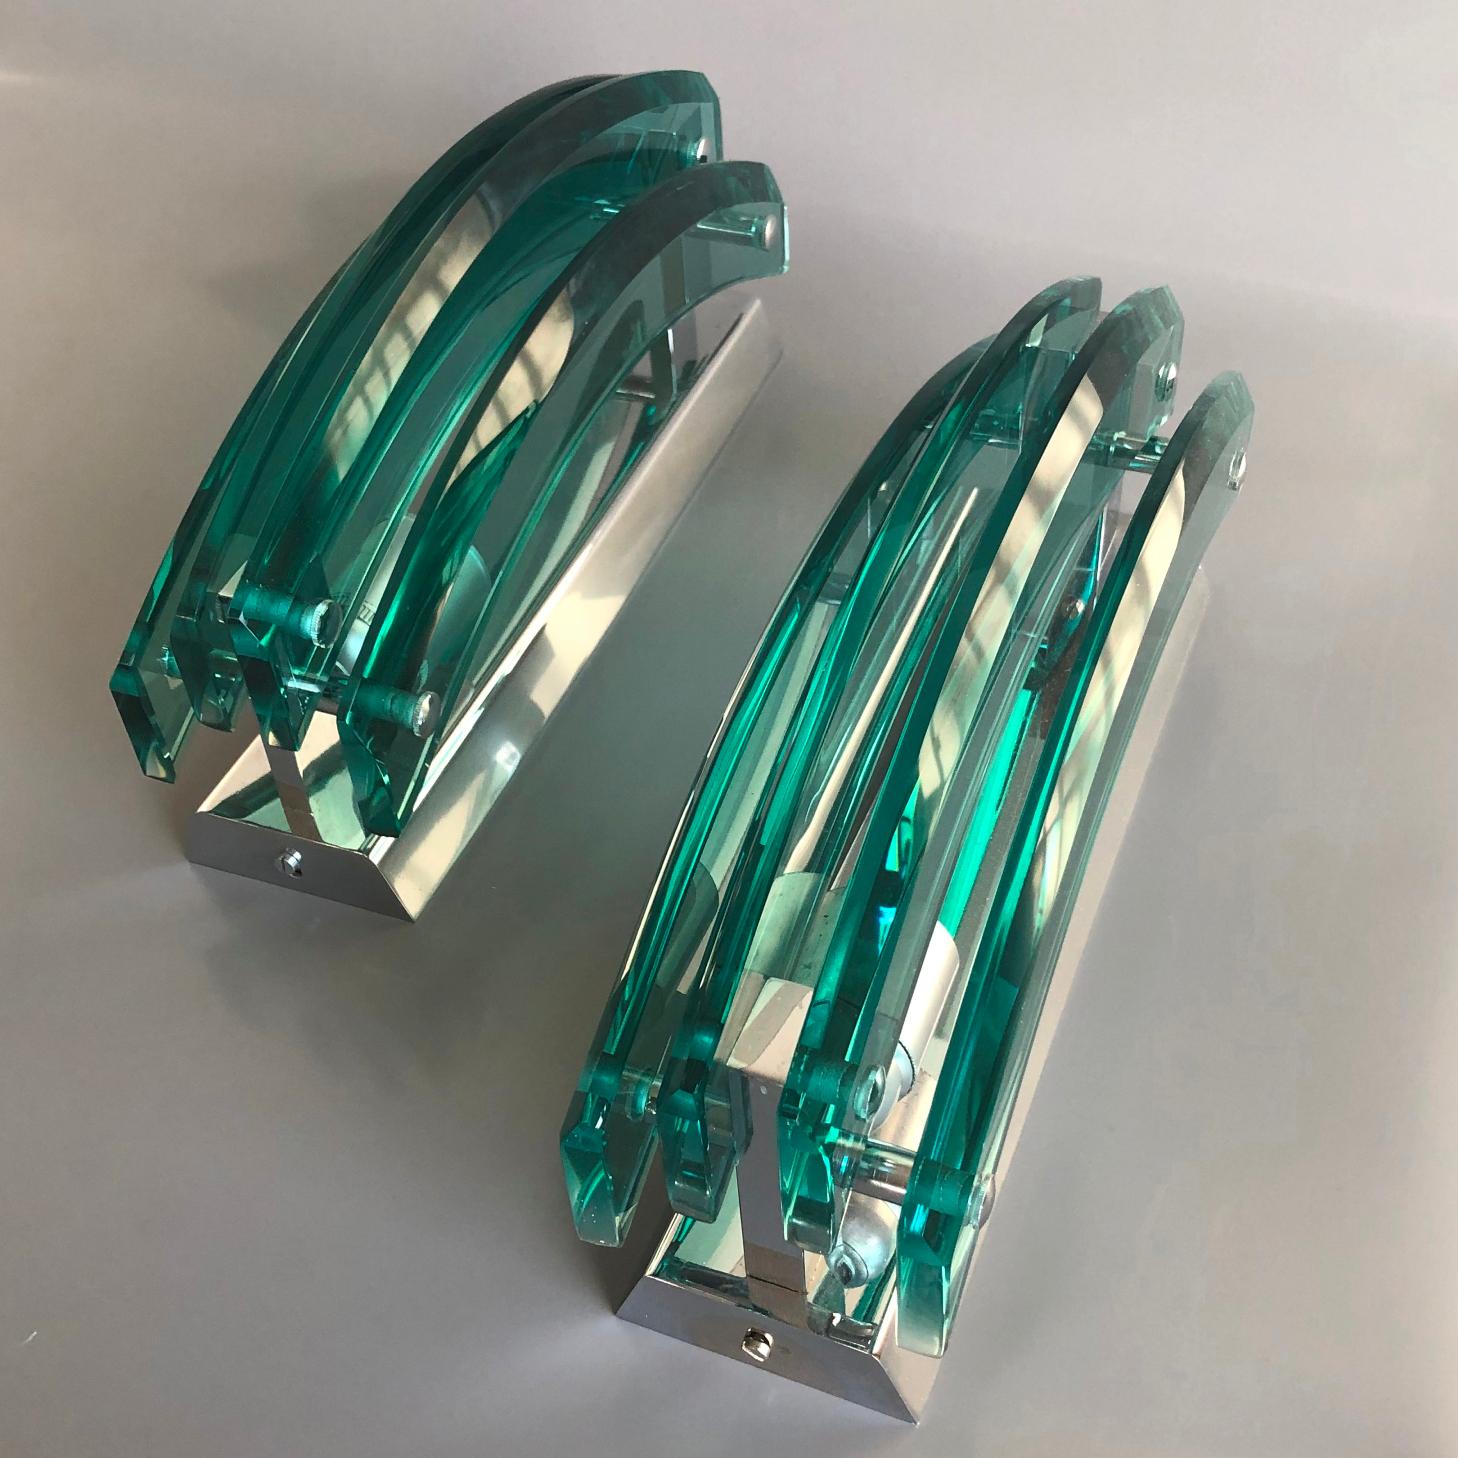 Pair of Emerald Green Murano Glass Wall Lights, Florence Italy 1970s For Sale 6